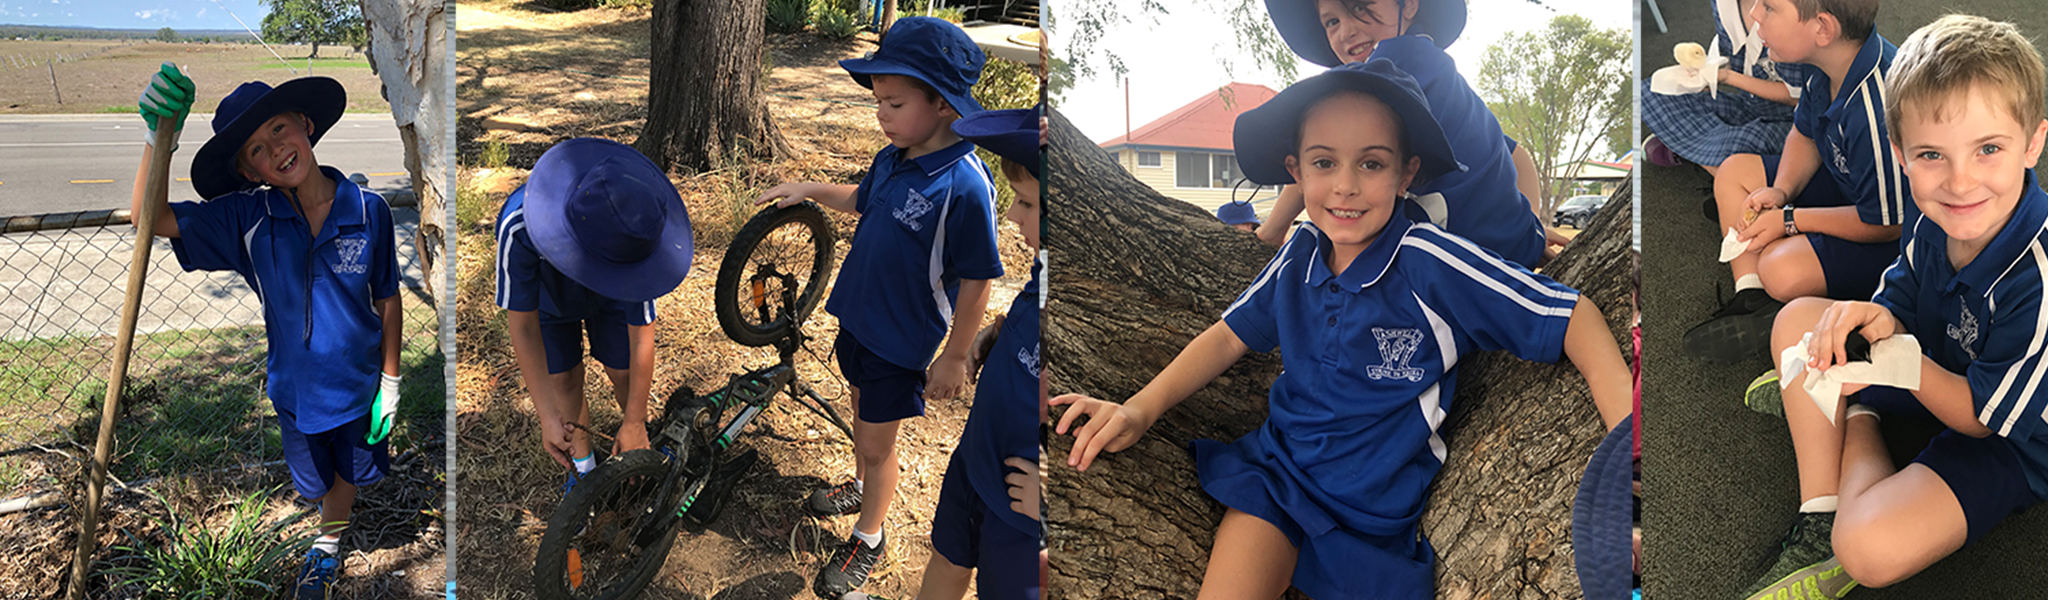 Ashwell State School students playing outdoors